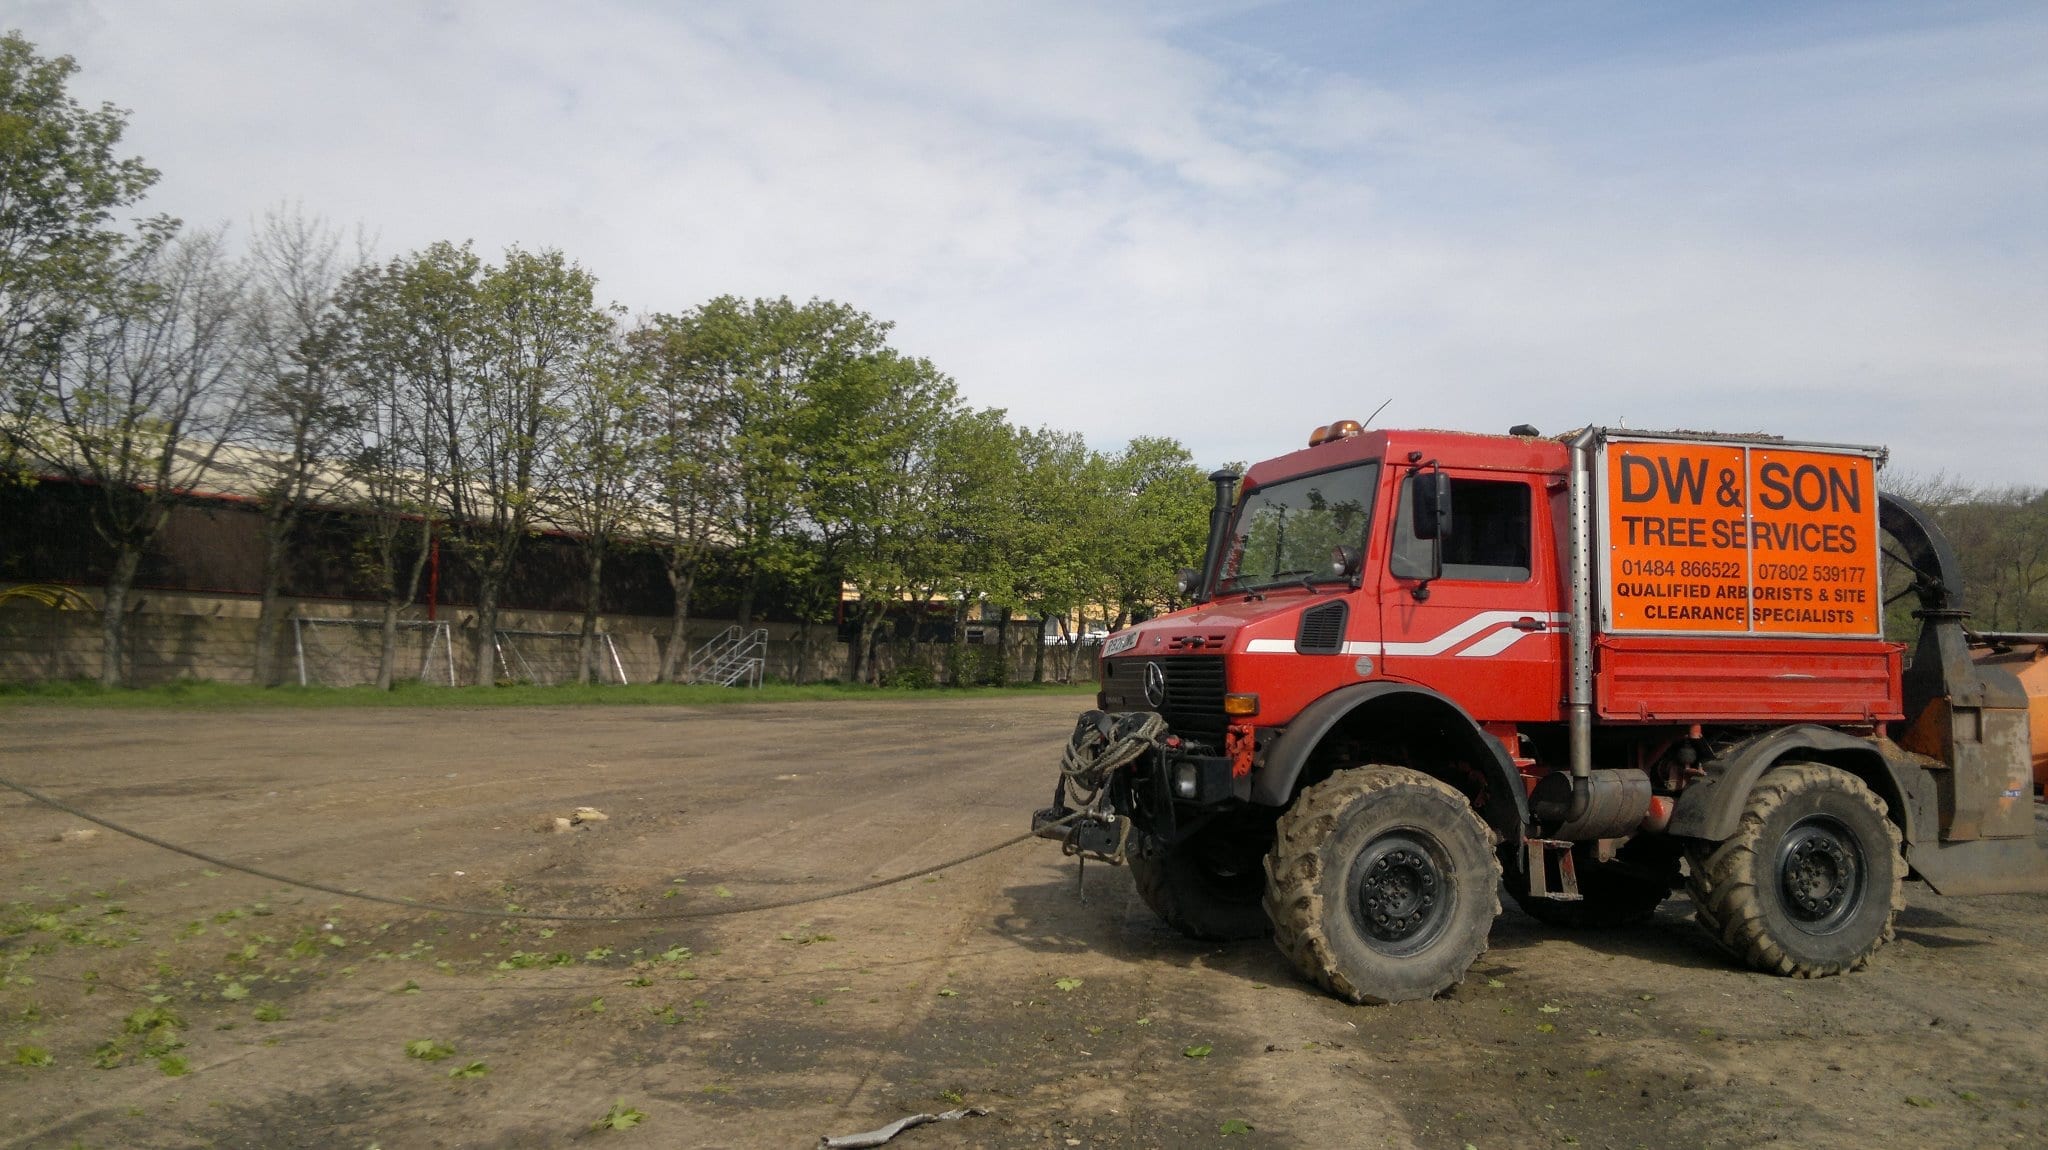 Tree surgeons Unimog with TPO powered wood chipper for chipping trees